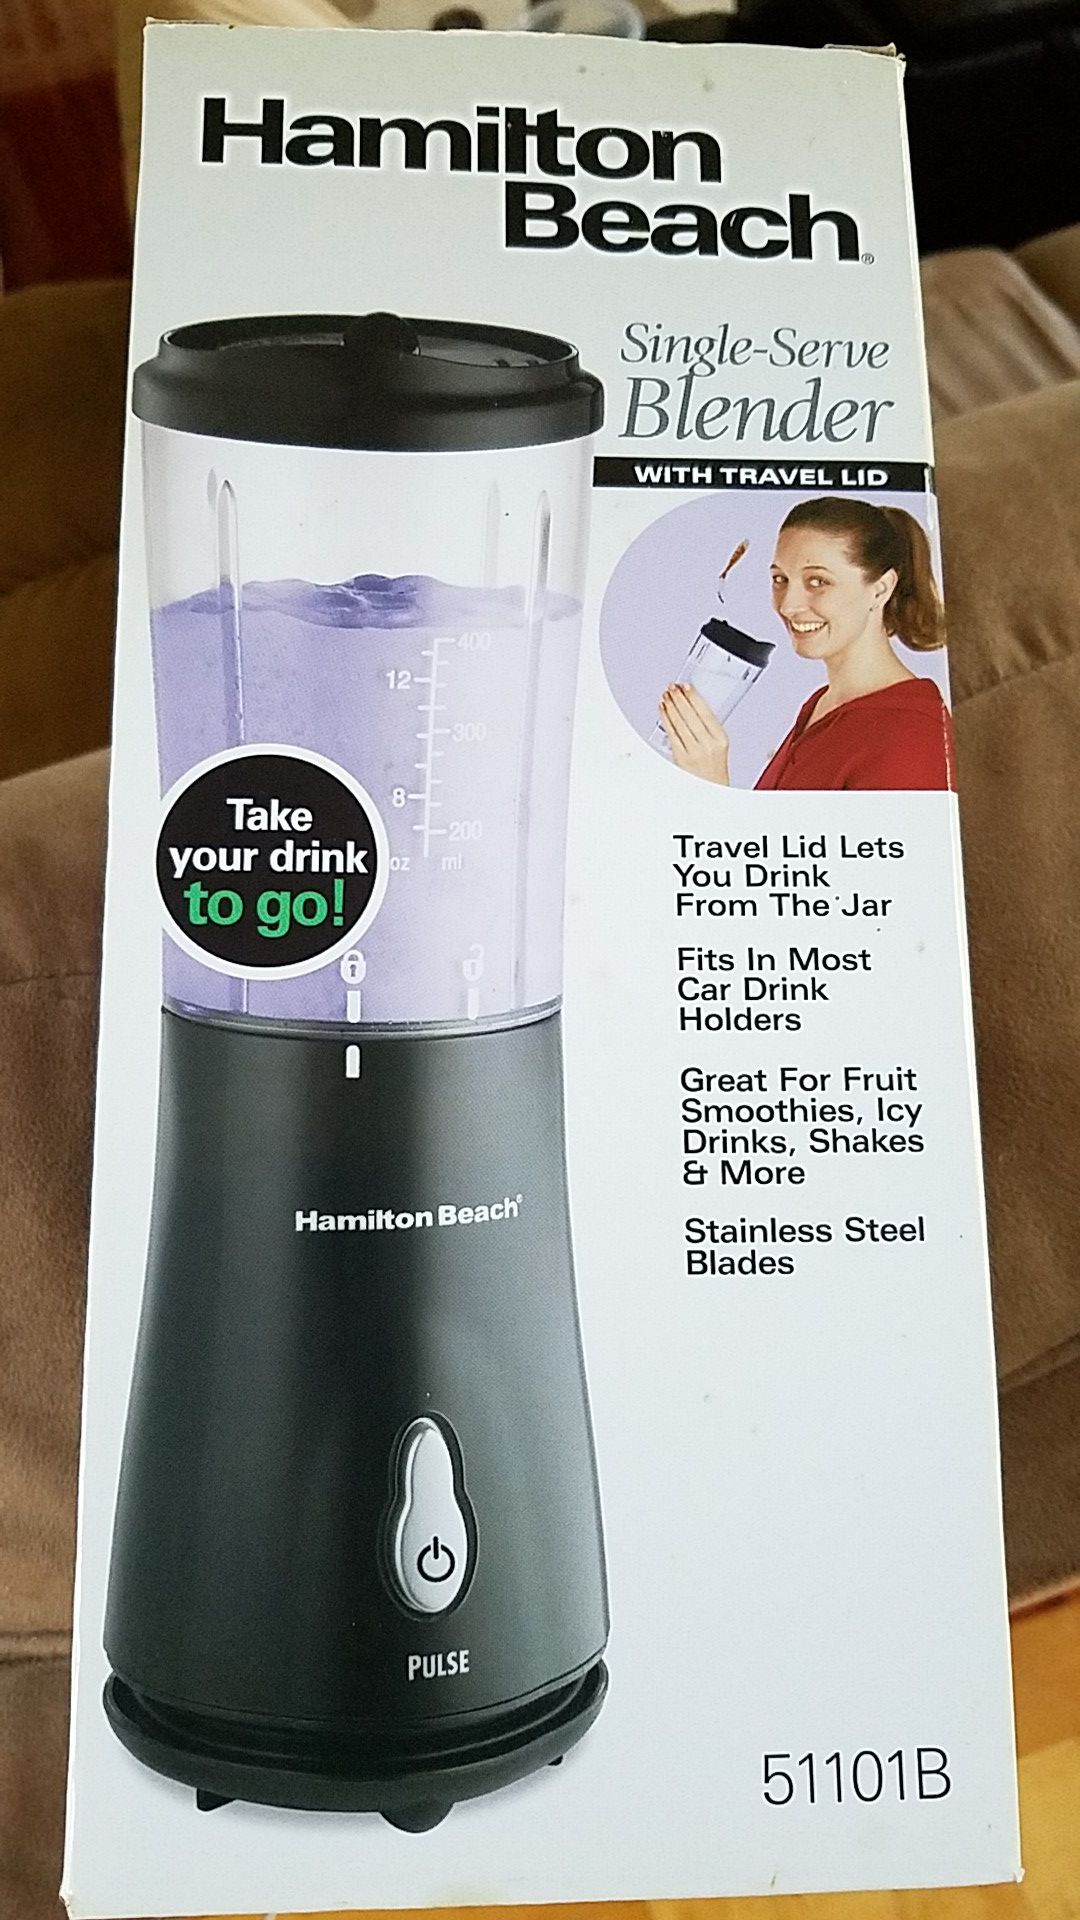 Price Reduced - Brand NEW - Hamilton Beach Single-Serve Blender with Travel Lid GREAT DEAL!!!